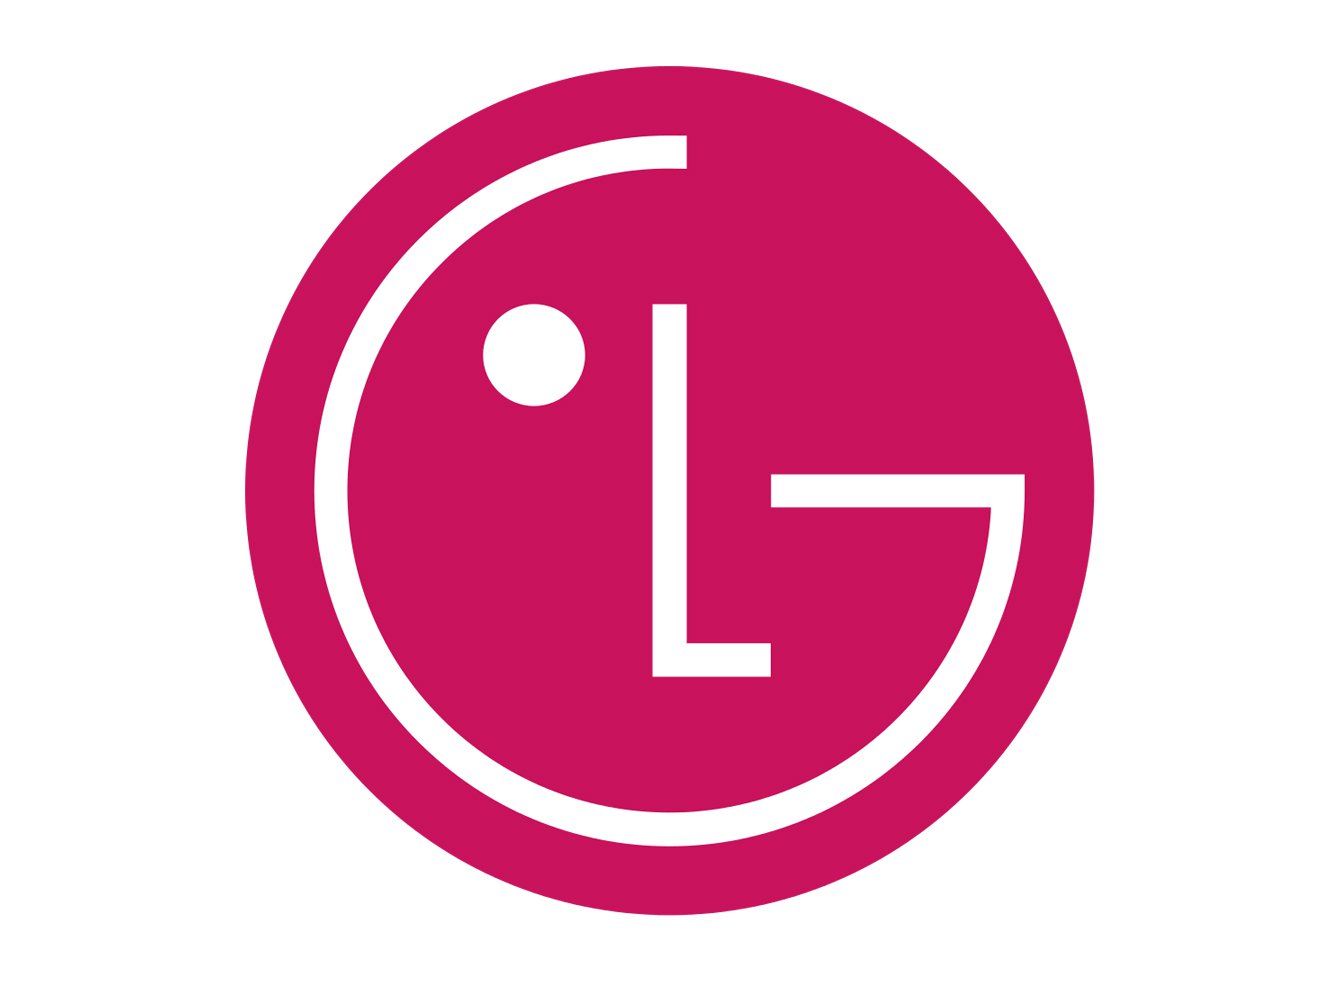 lg-logo-symbol-meaning-history-and-evolution